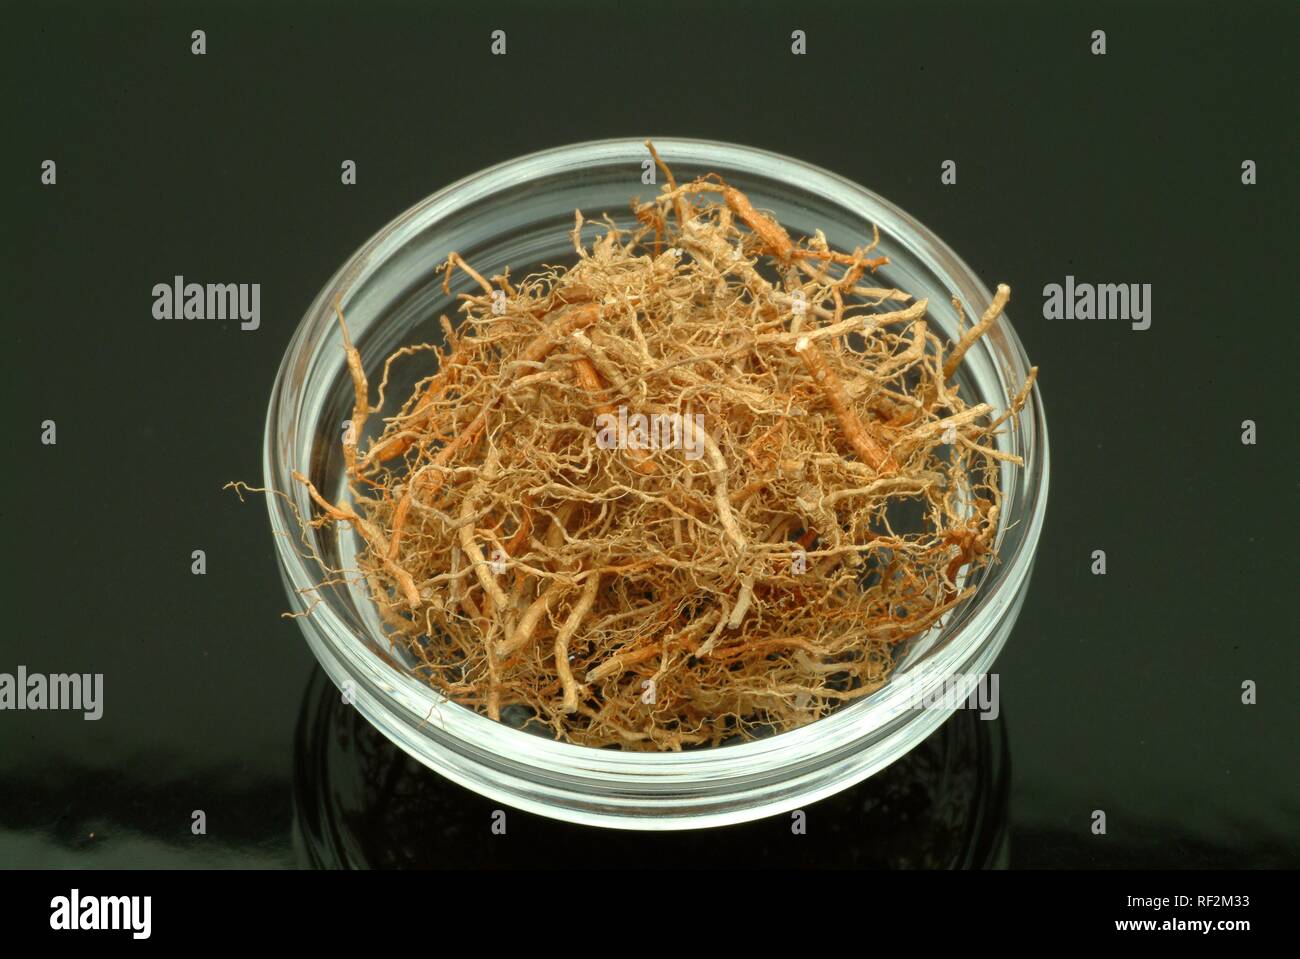 Dried Vetiver (Vetiveria zizanioides) in a glass bowl, medicinal plant Stock Photo